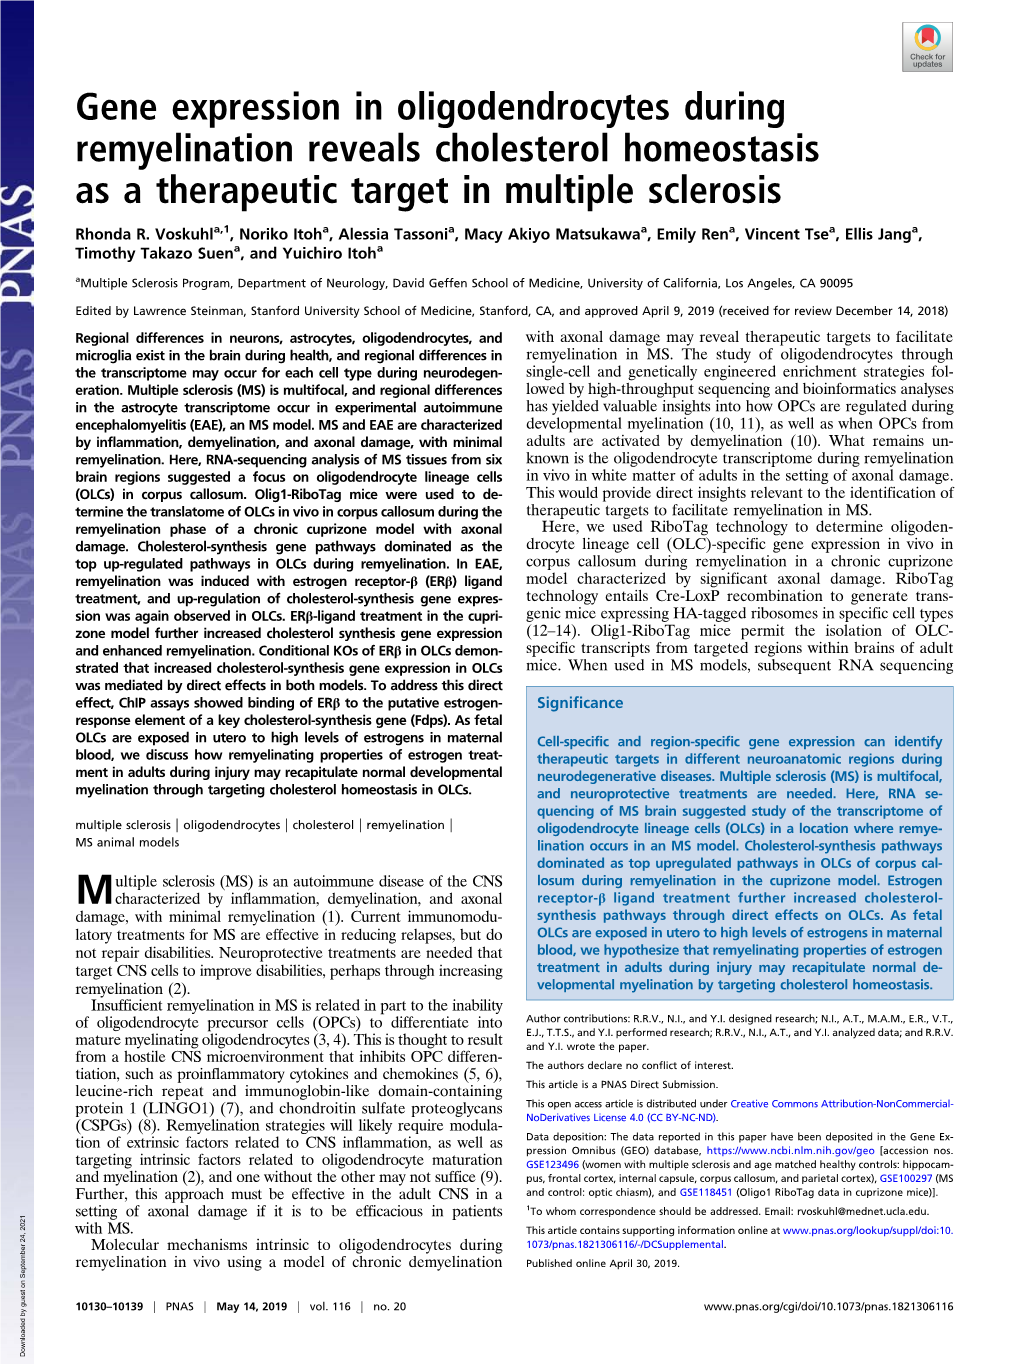 Gene Expression in Oligodendrocytes During Remyelination Reveals Cholesterol Homeostasis As a Therapeutic Target in Multiple Sclerosis